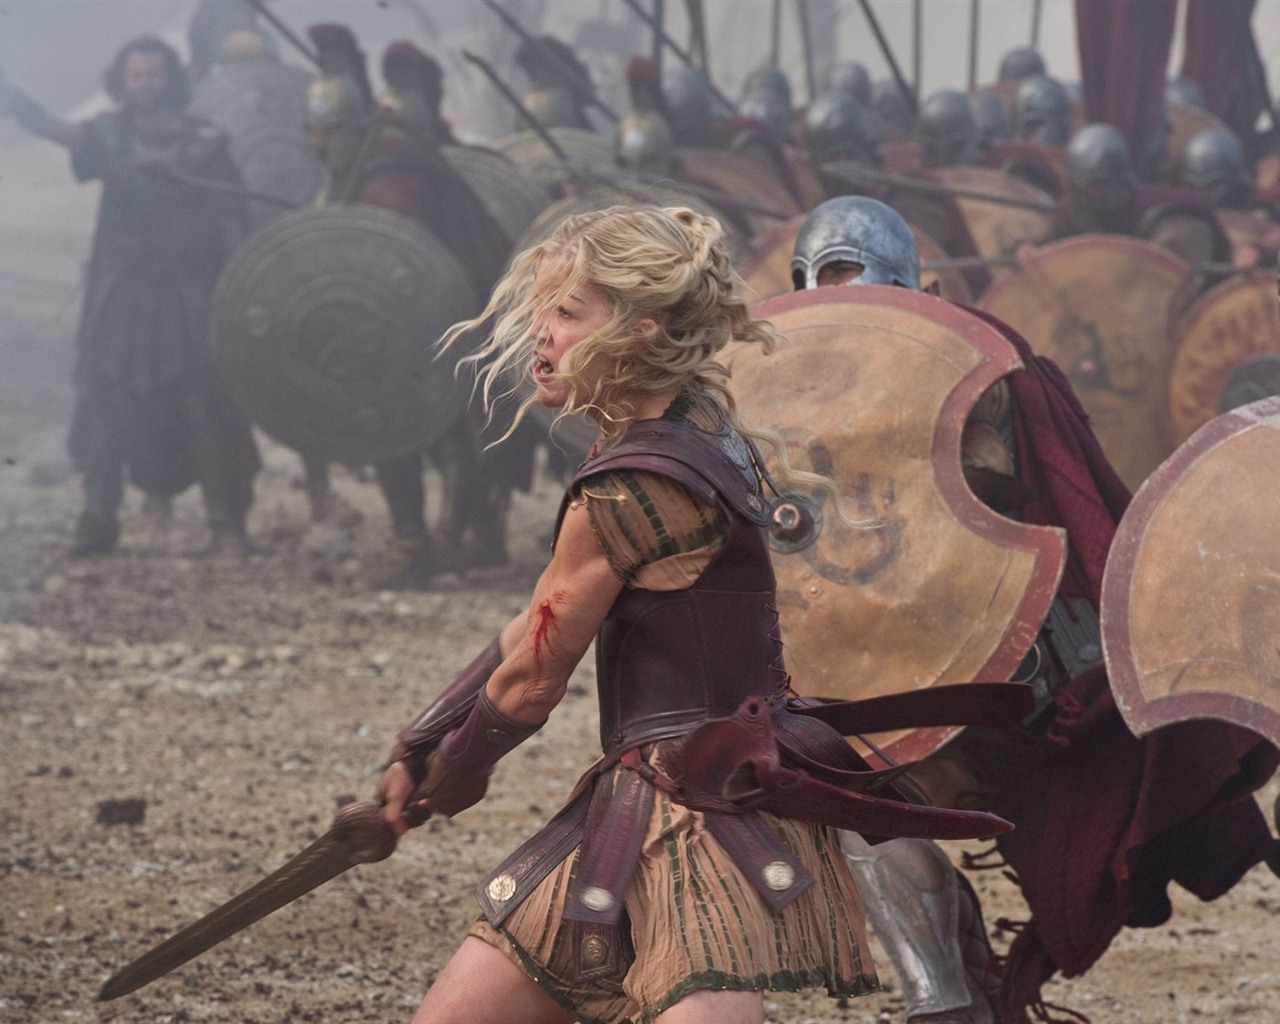 Wrath of the Titans HD wallpapers #8 - 1280x1024